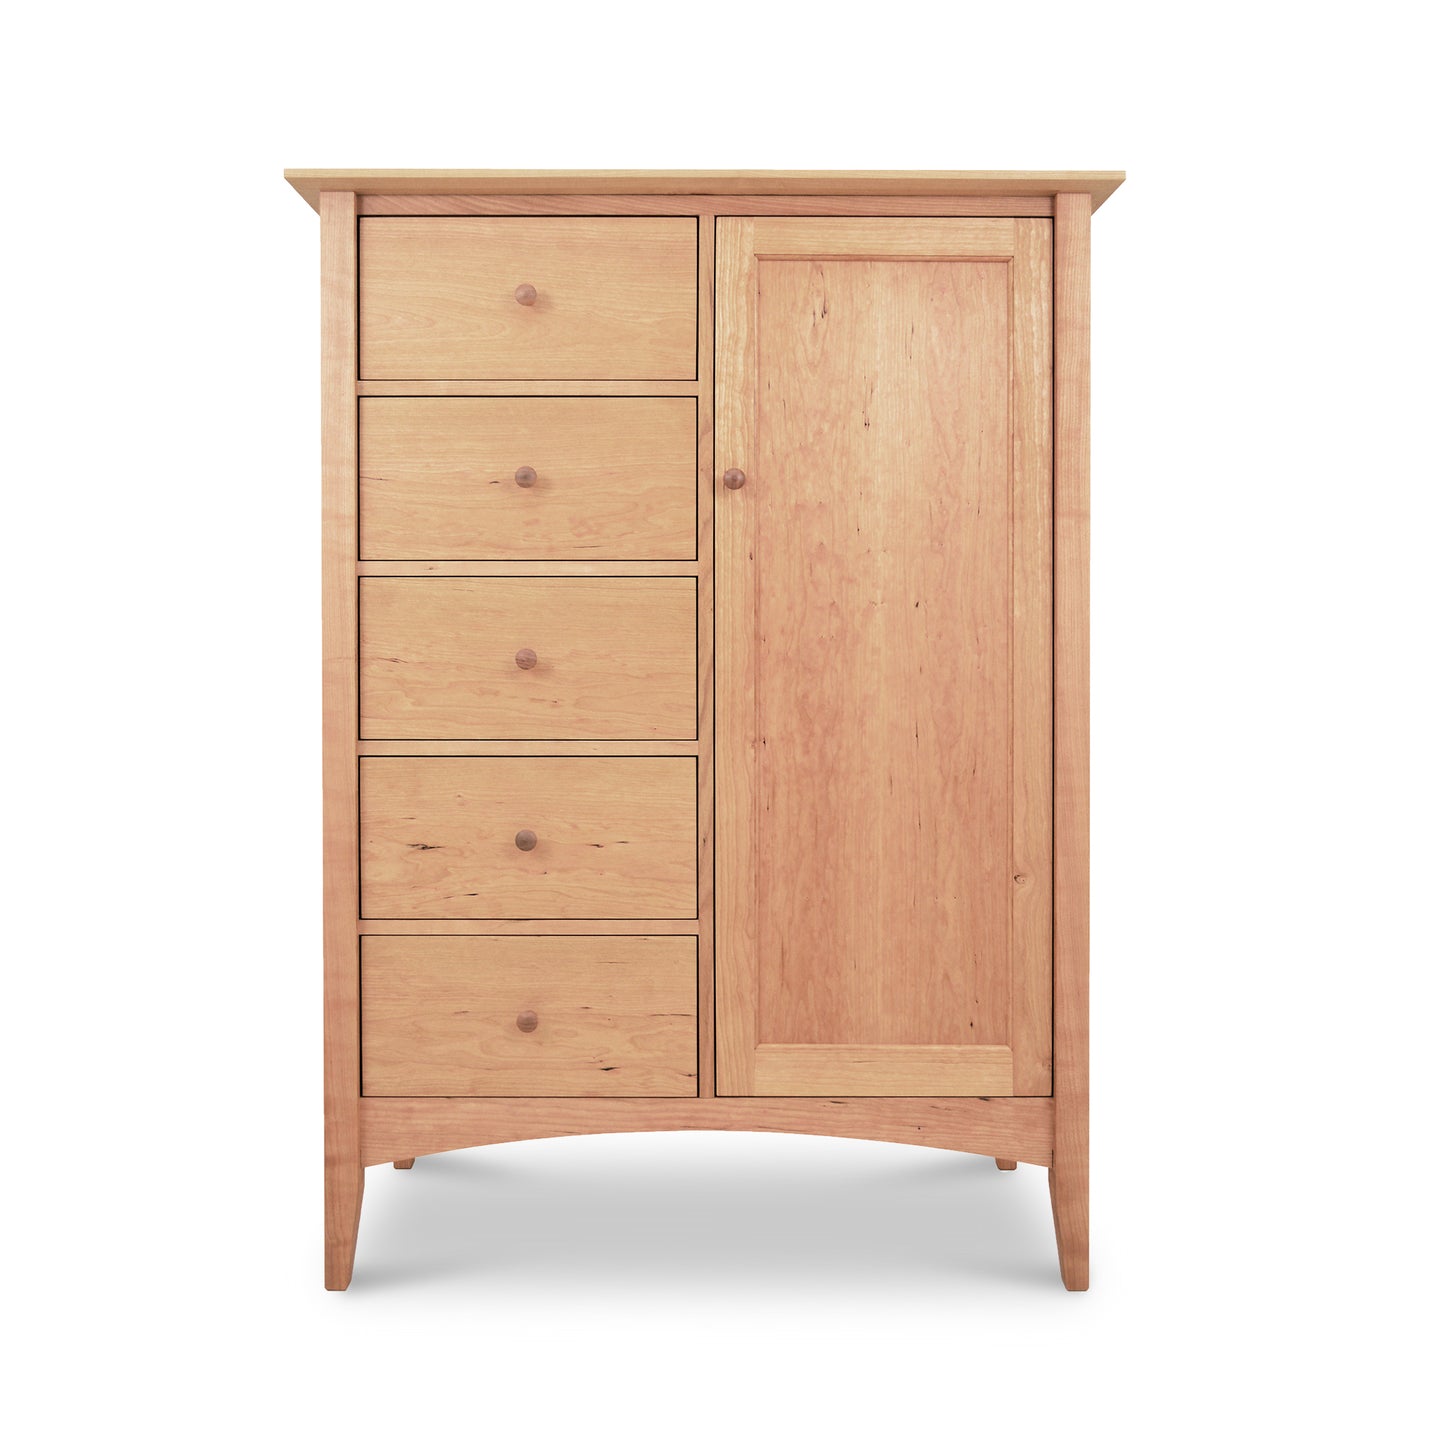 An image of the "American Shaker Sweater Chest" by "Maple Corner Woodworks", a wooden cabinet with drawers, featuring hardwood construction.